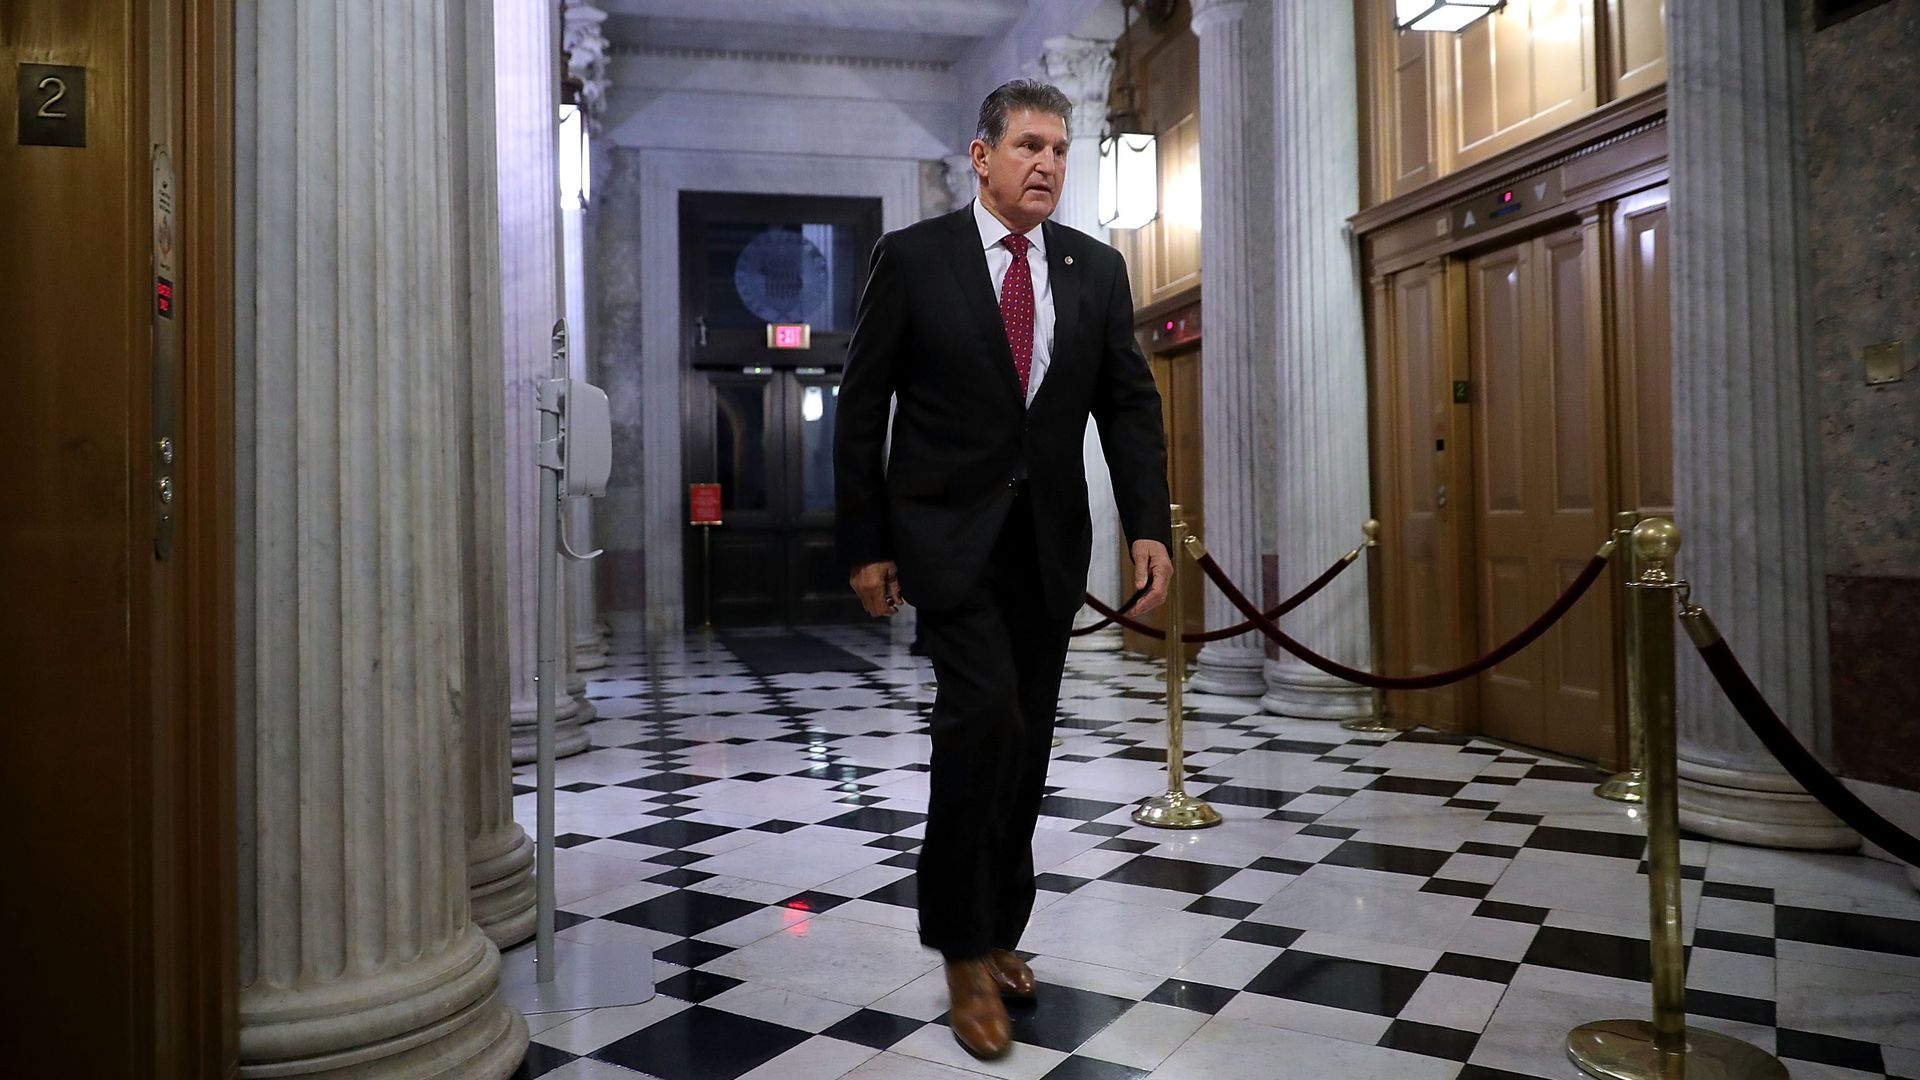 Sen. Joe Manchin (D-WV) arrives at the U.S. Capitol for early morning votes